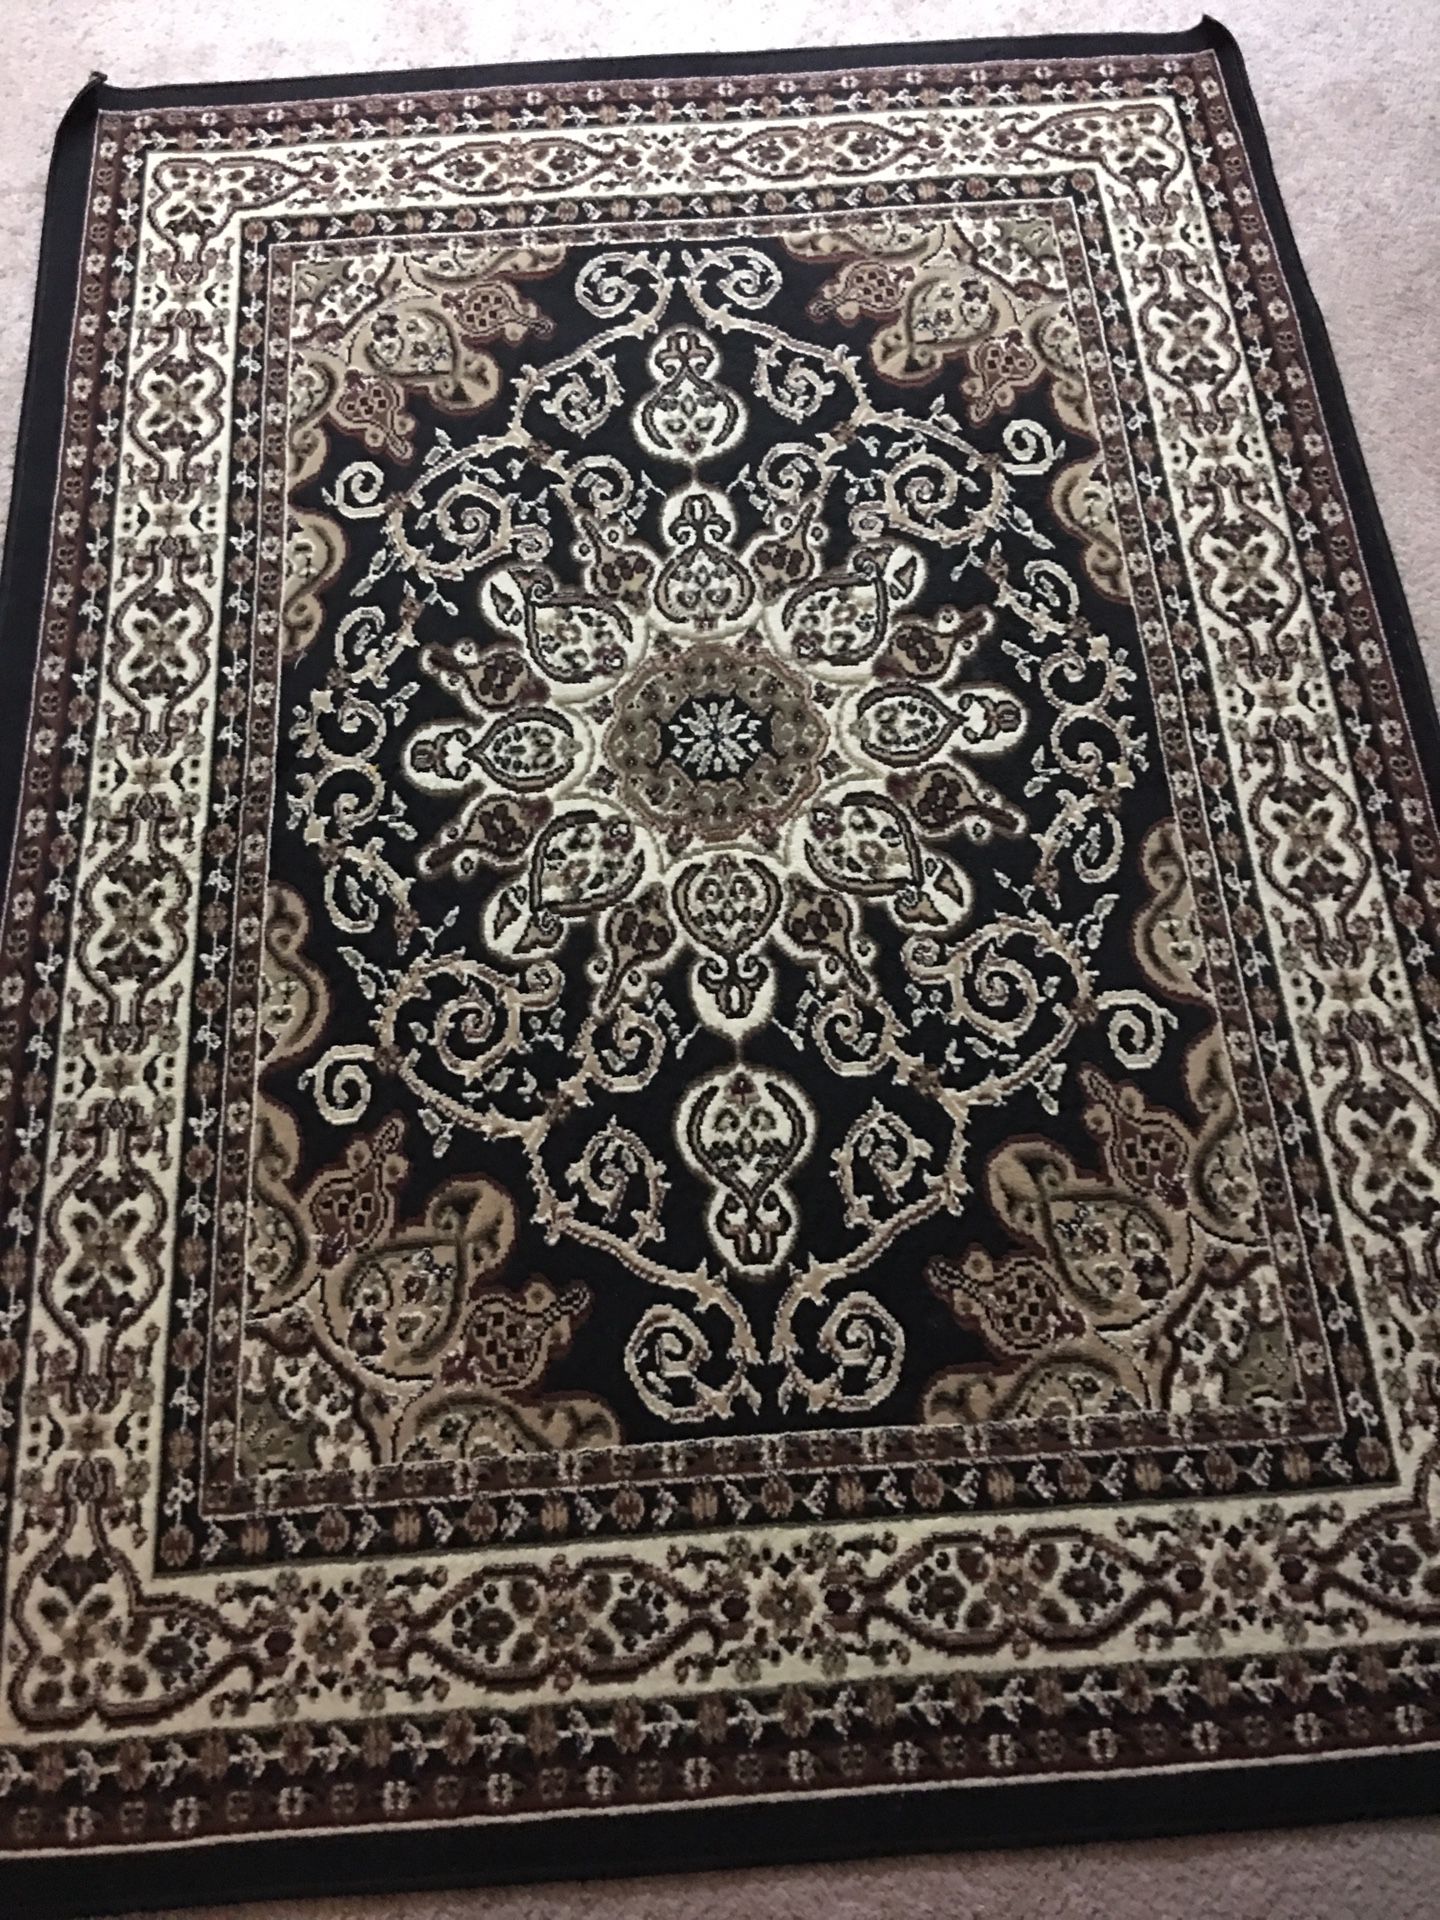 Area rug in great condition.